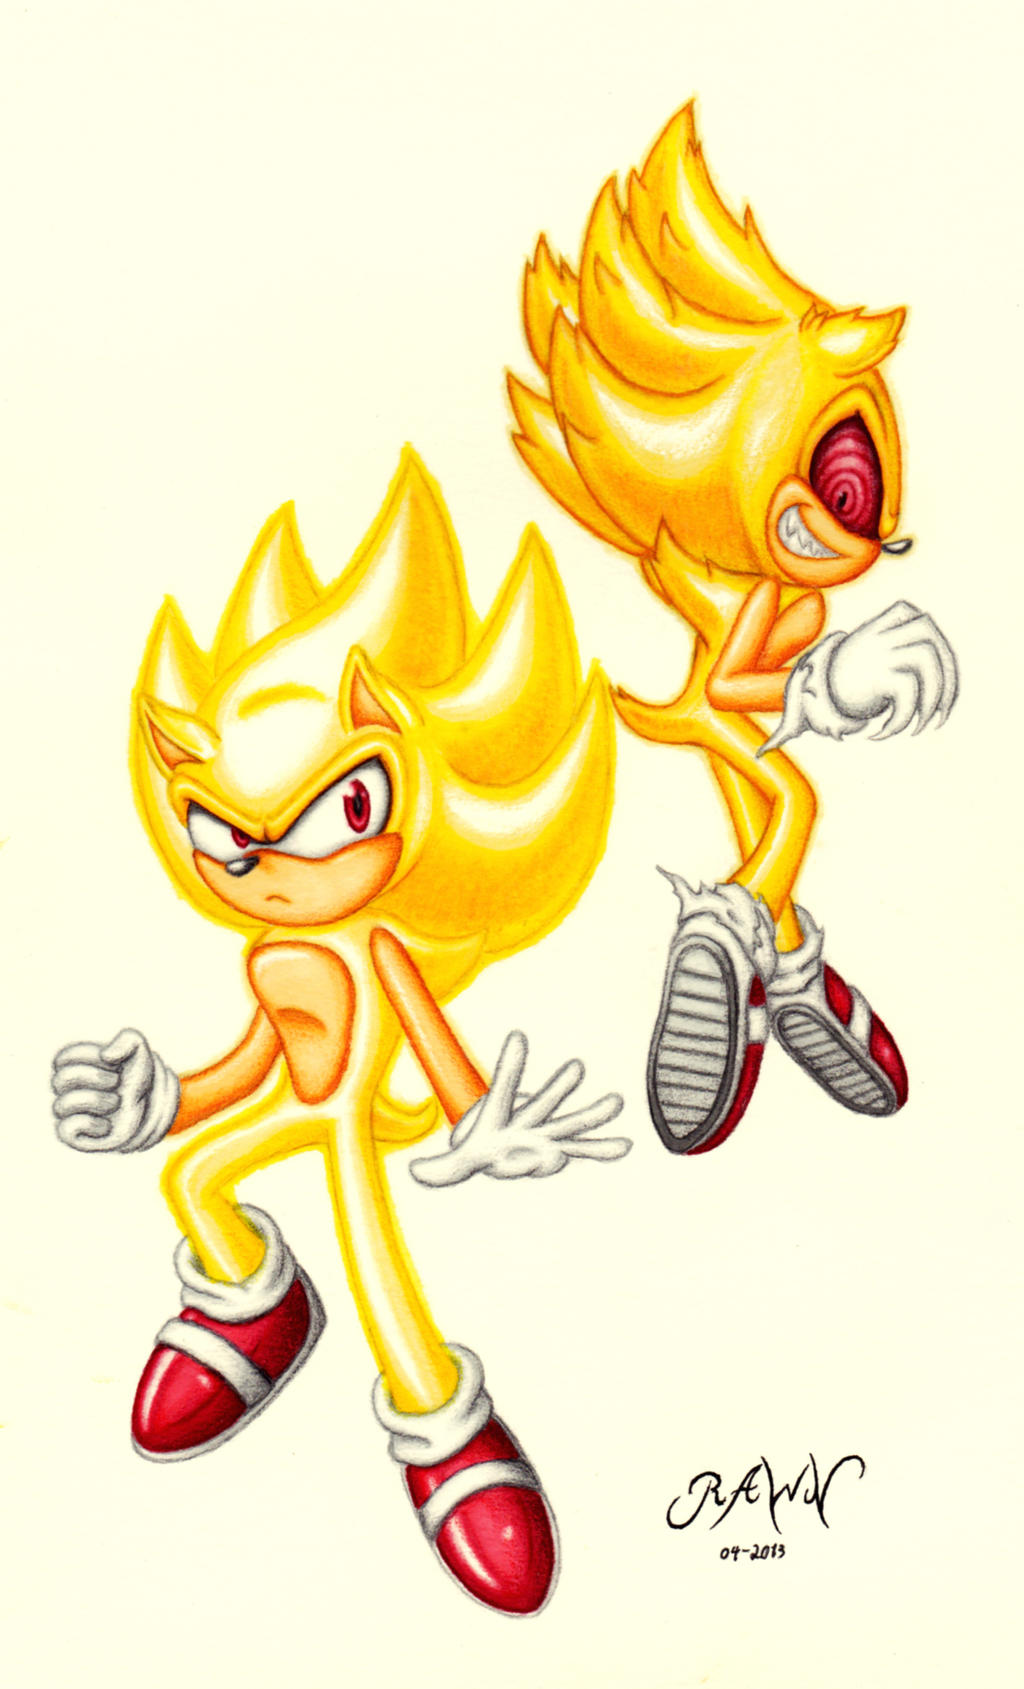 Fleetway and Super Sonic: Two Sides of a Hero